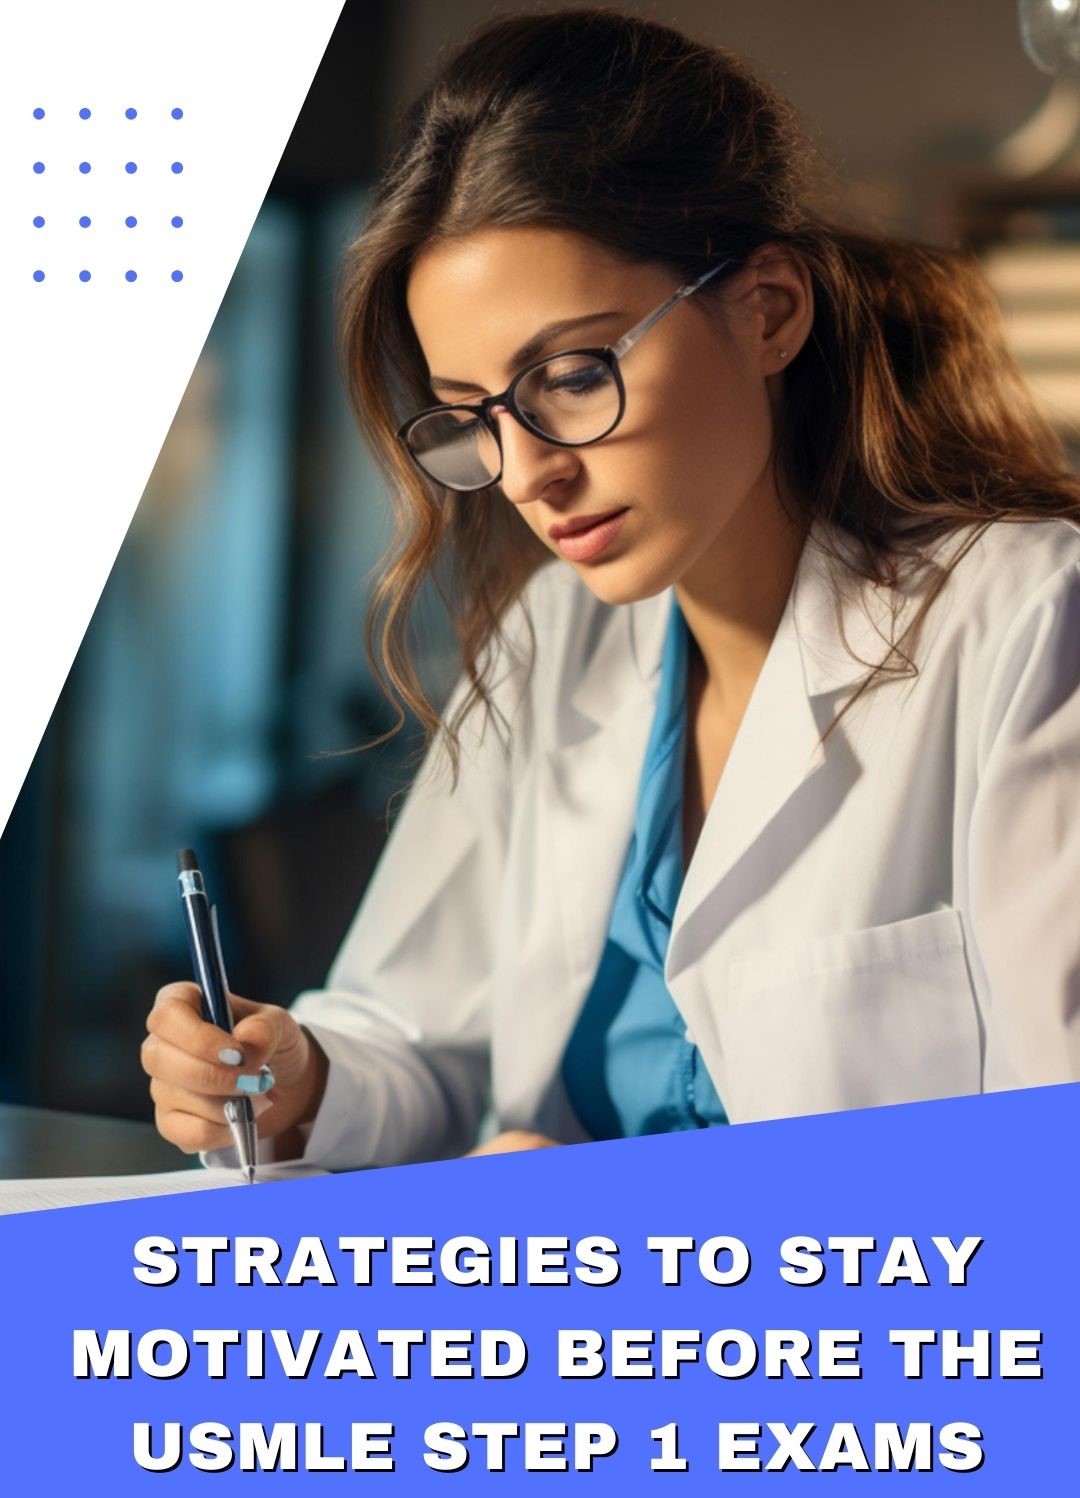 Strategies to Stay Motivated Before the USMLE Step 1 Exams